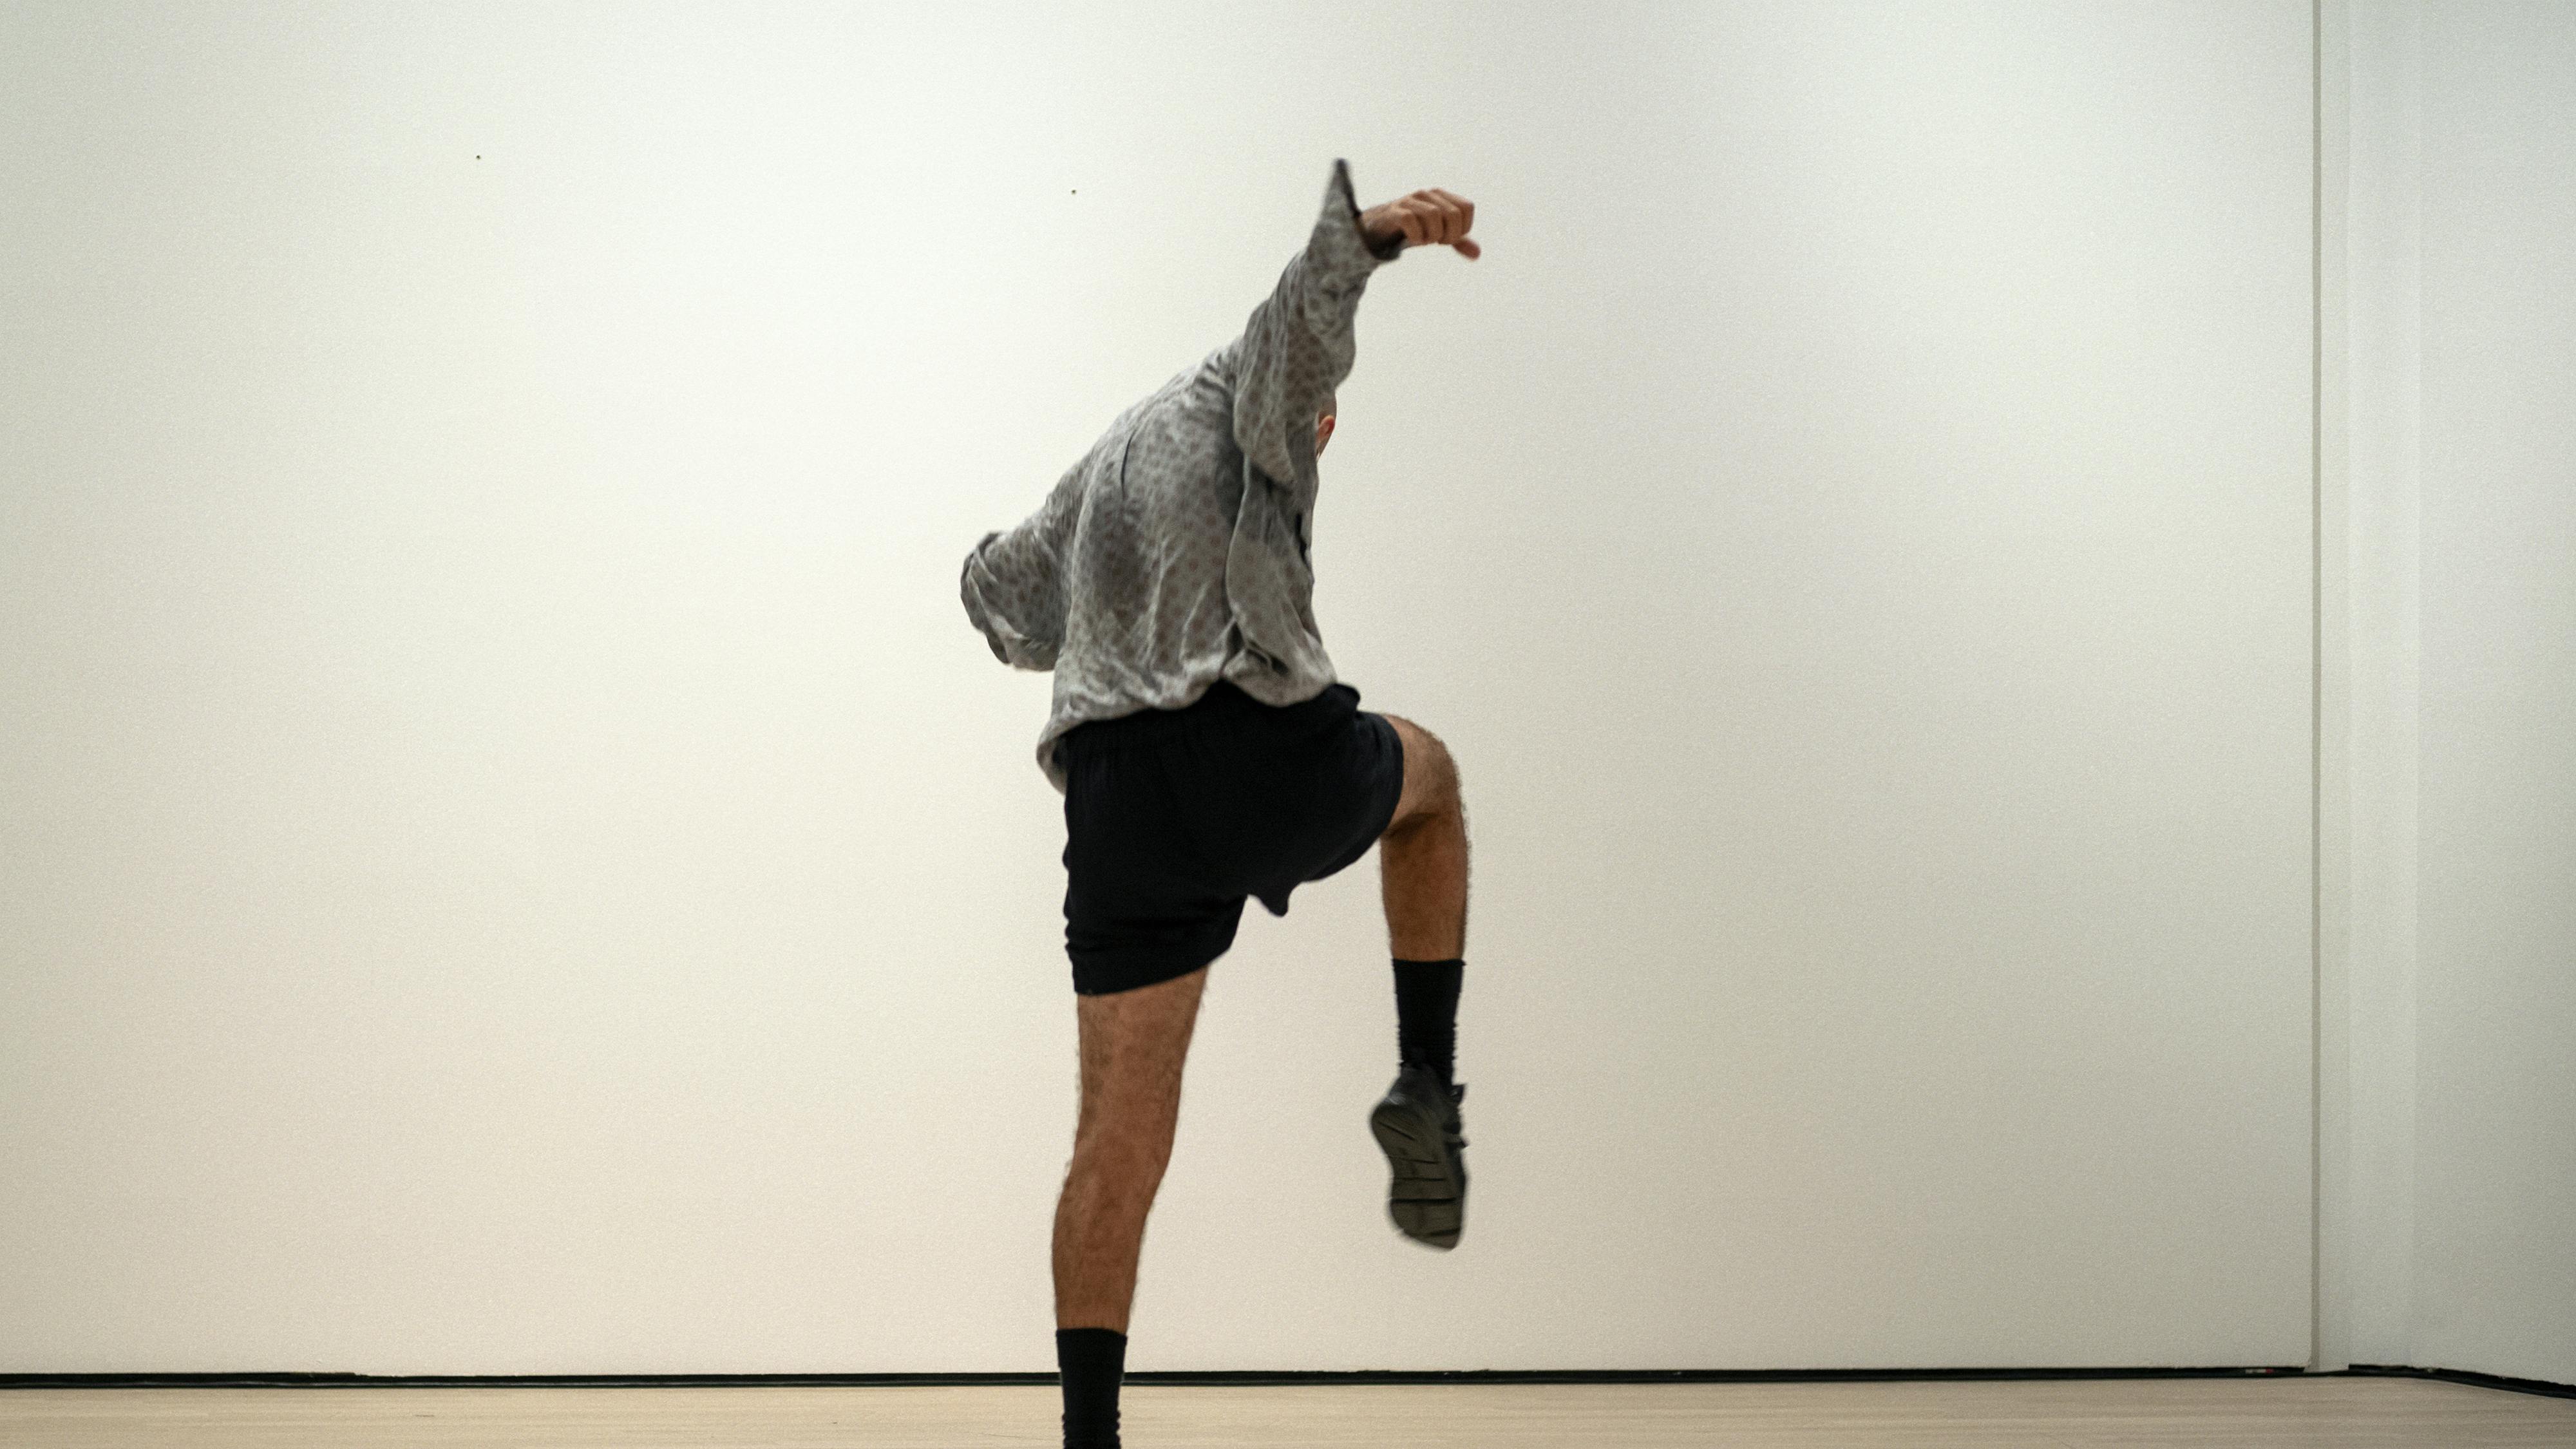 Daniele Ninarello with his back turned, right  leg and arm rised upward. His hand is closed into a fist.